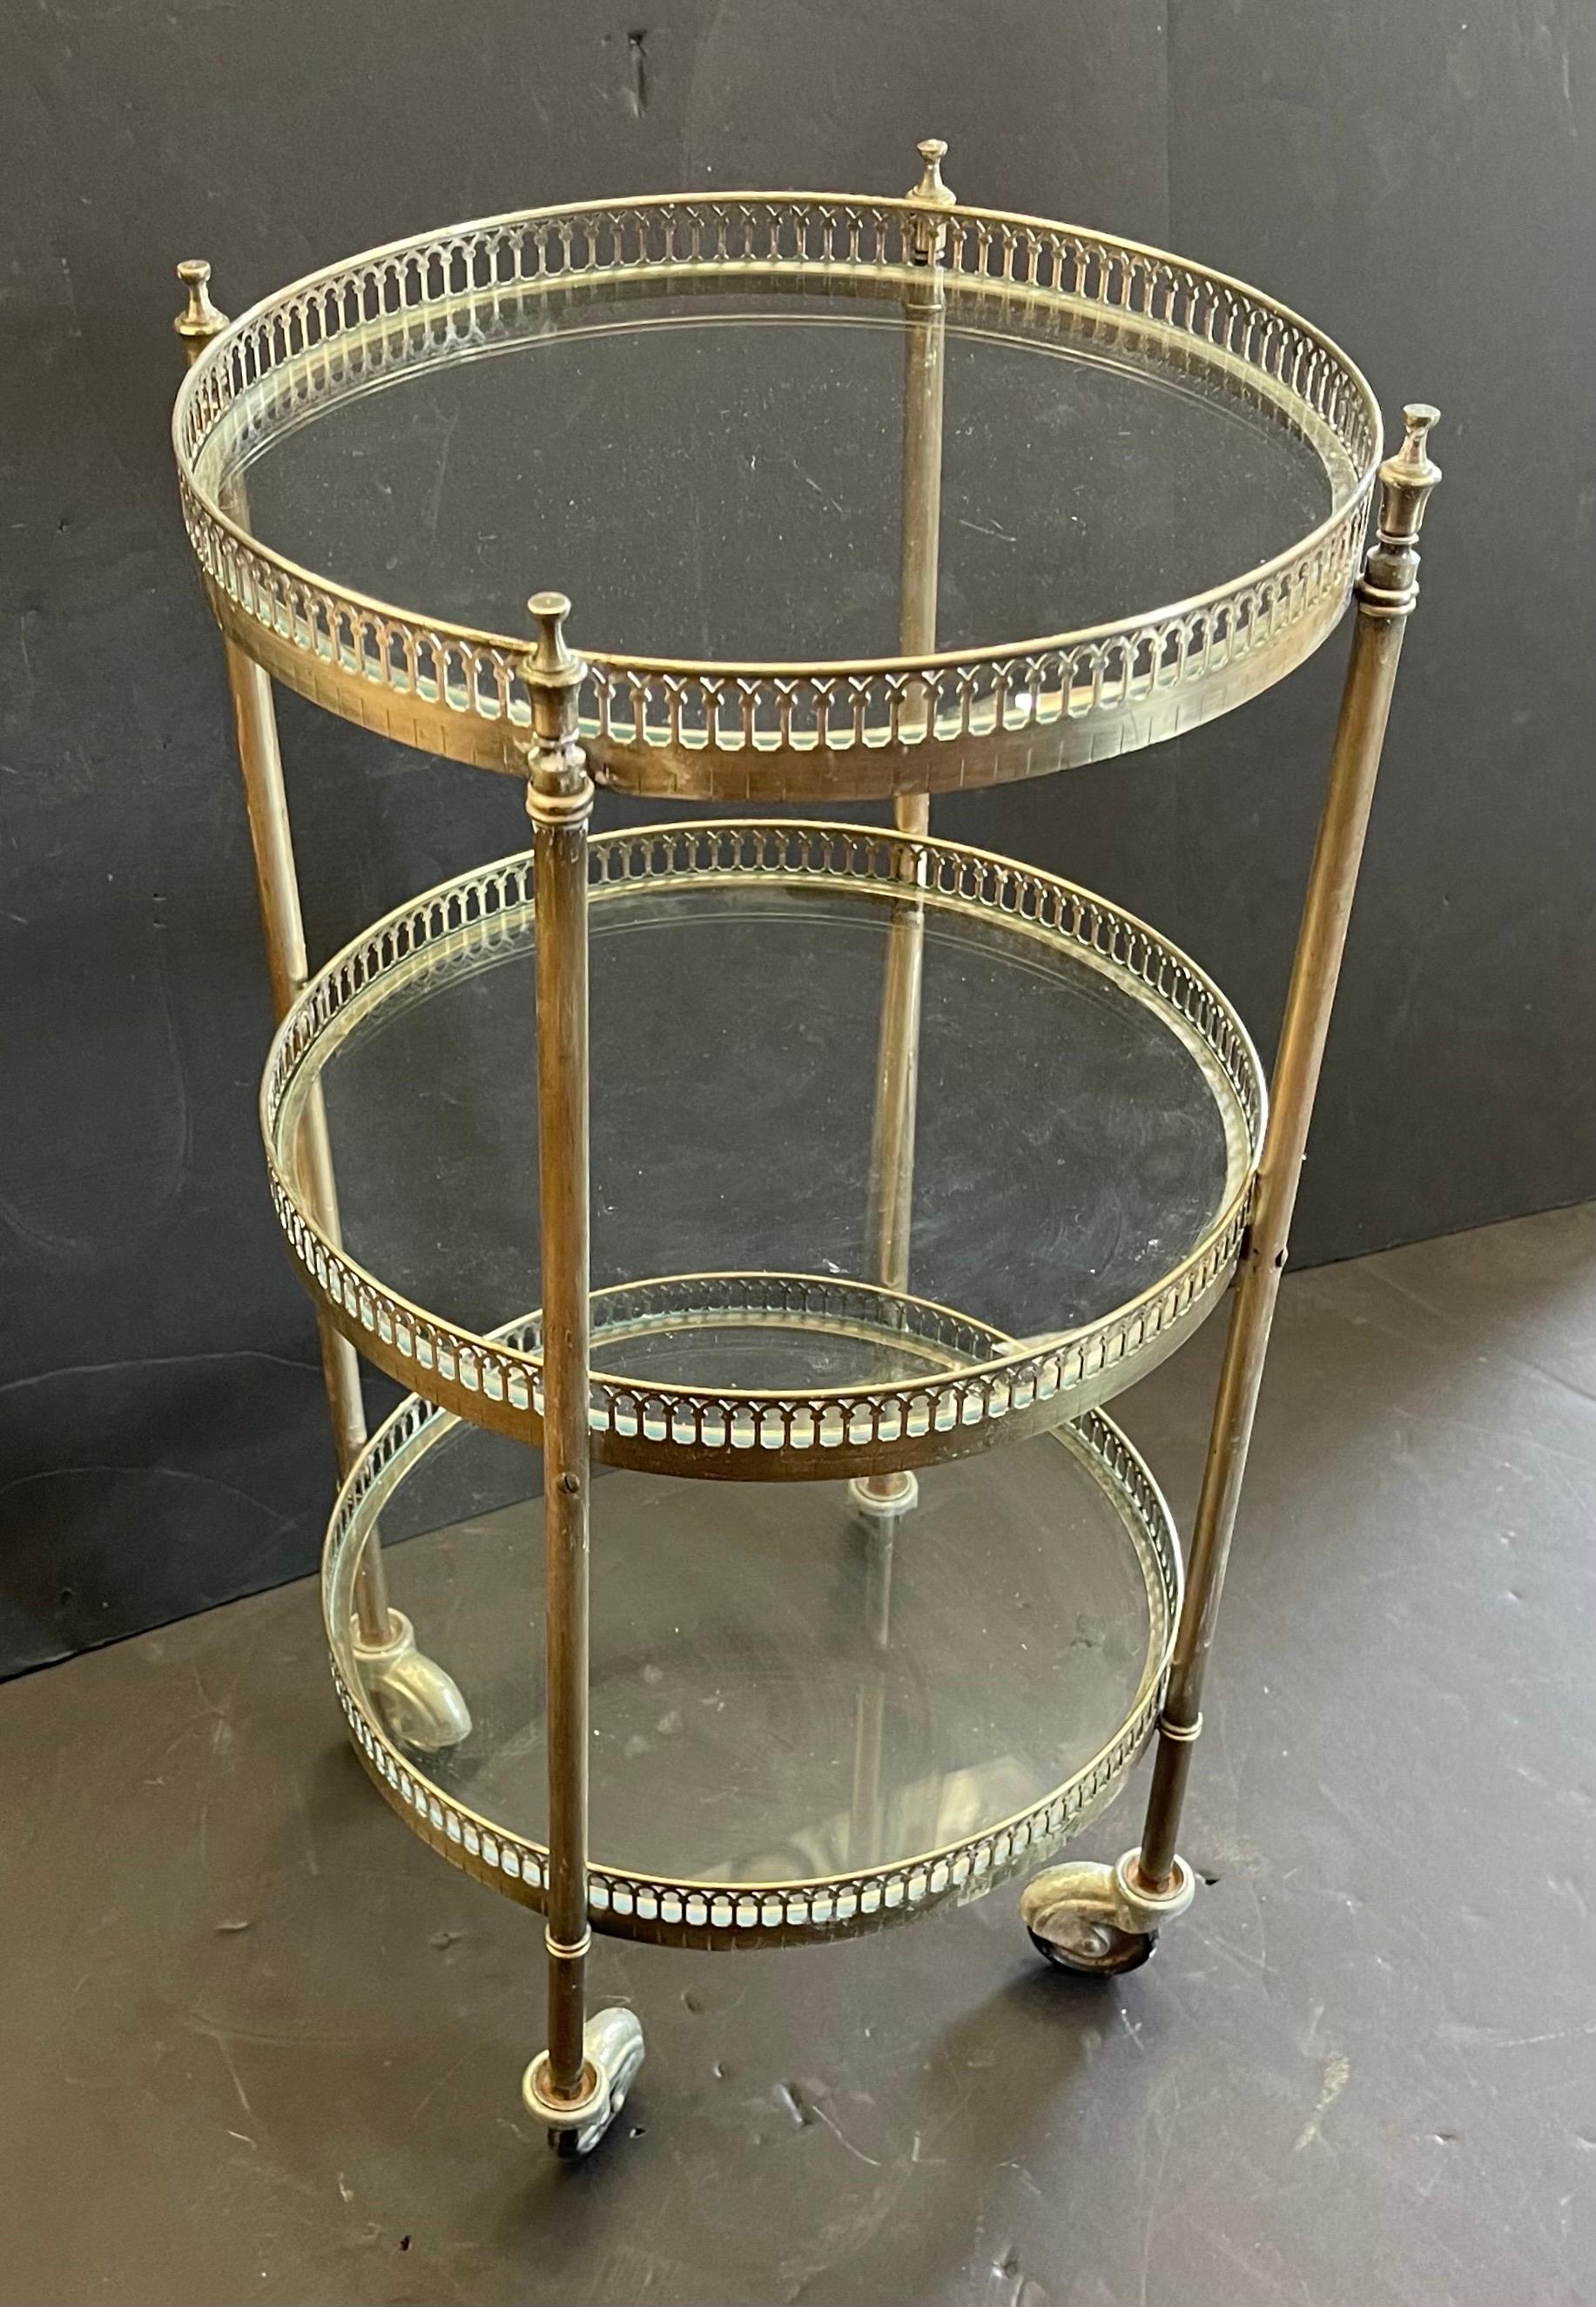 A wonderful French nickel silver plated & glass insert three-tier bar cart, round side table that is supported by Smooth Original Casters.

 